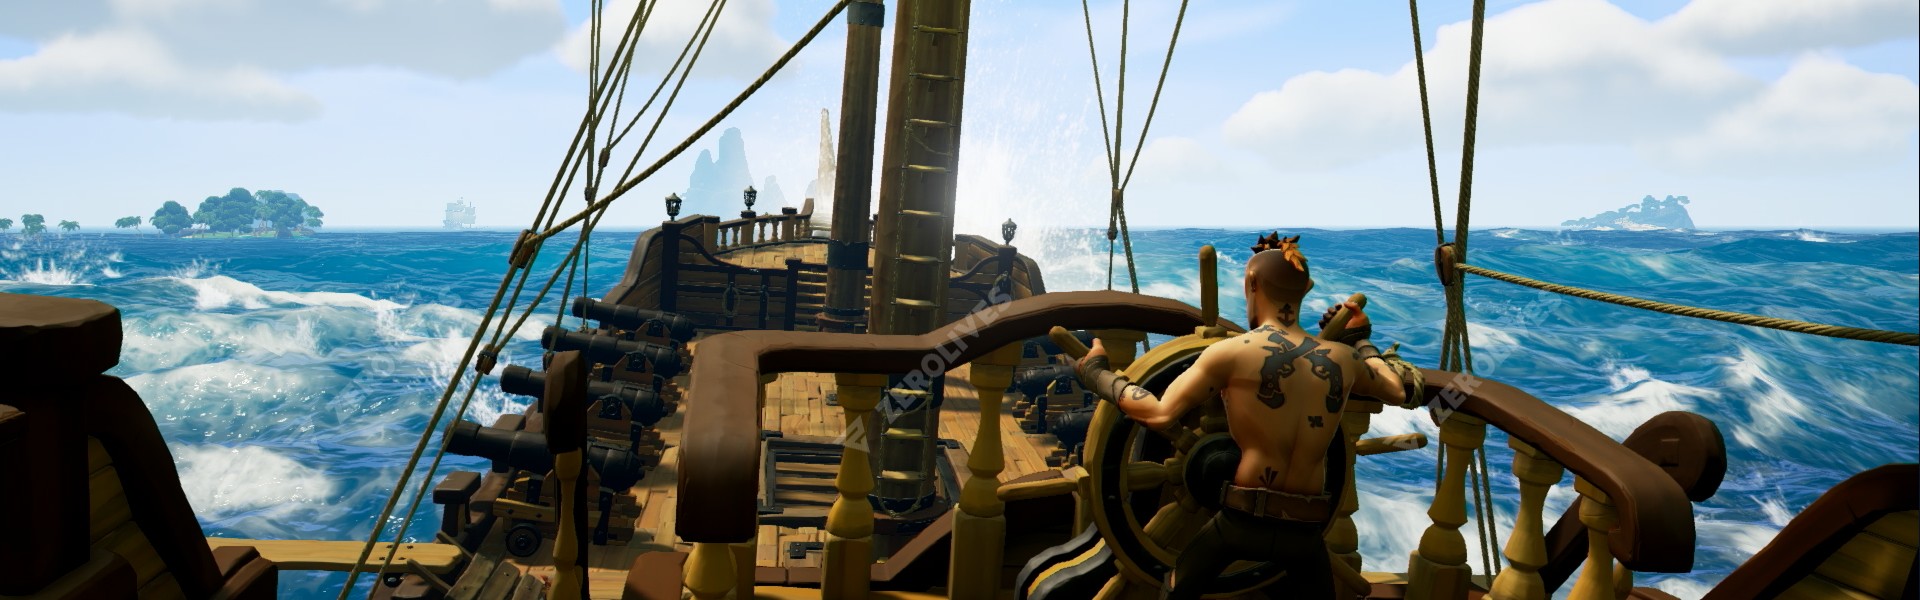 Sea of Thieves